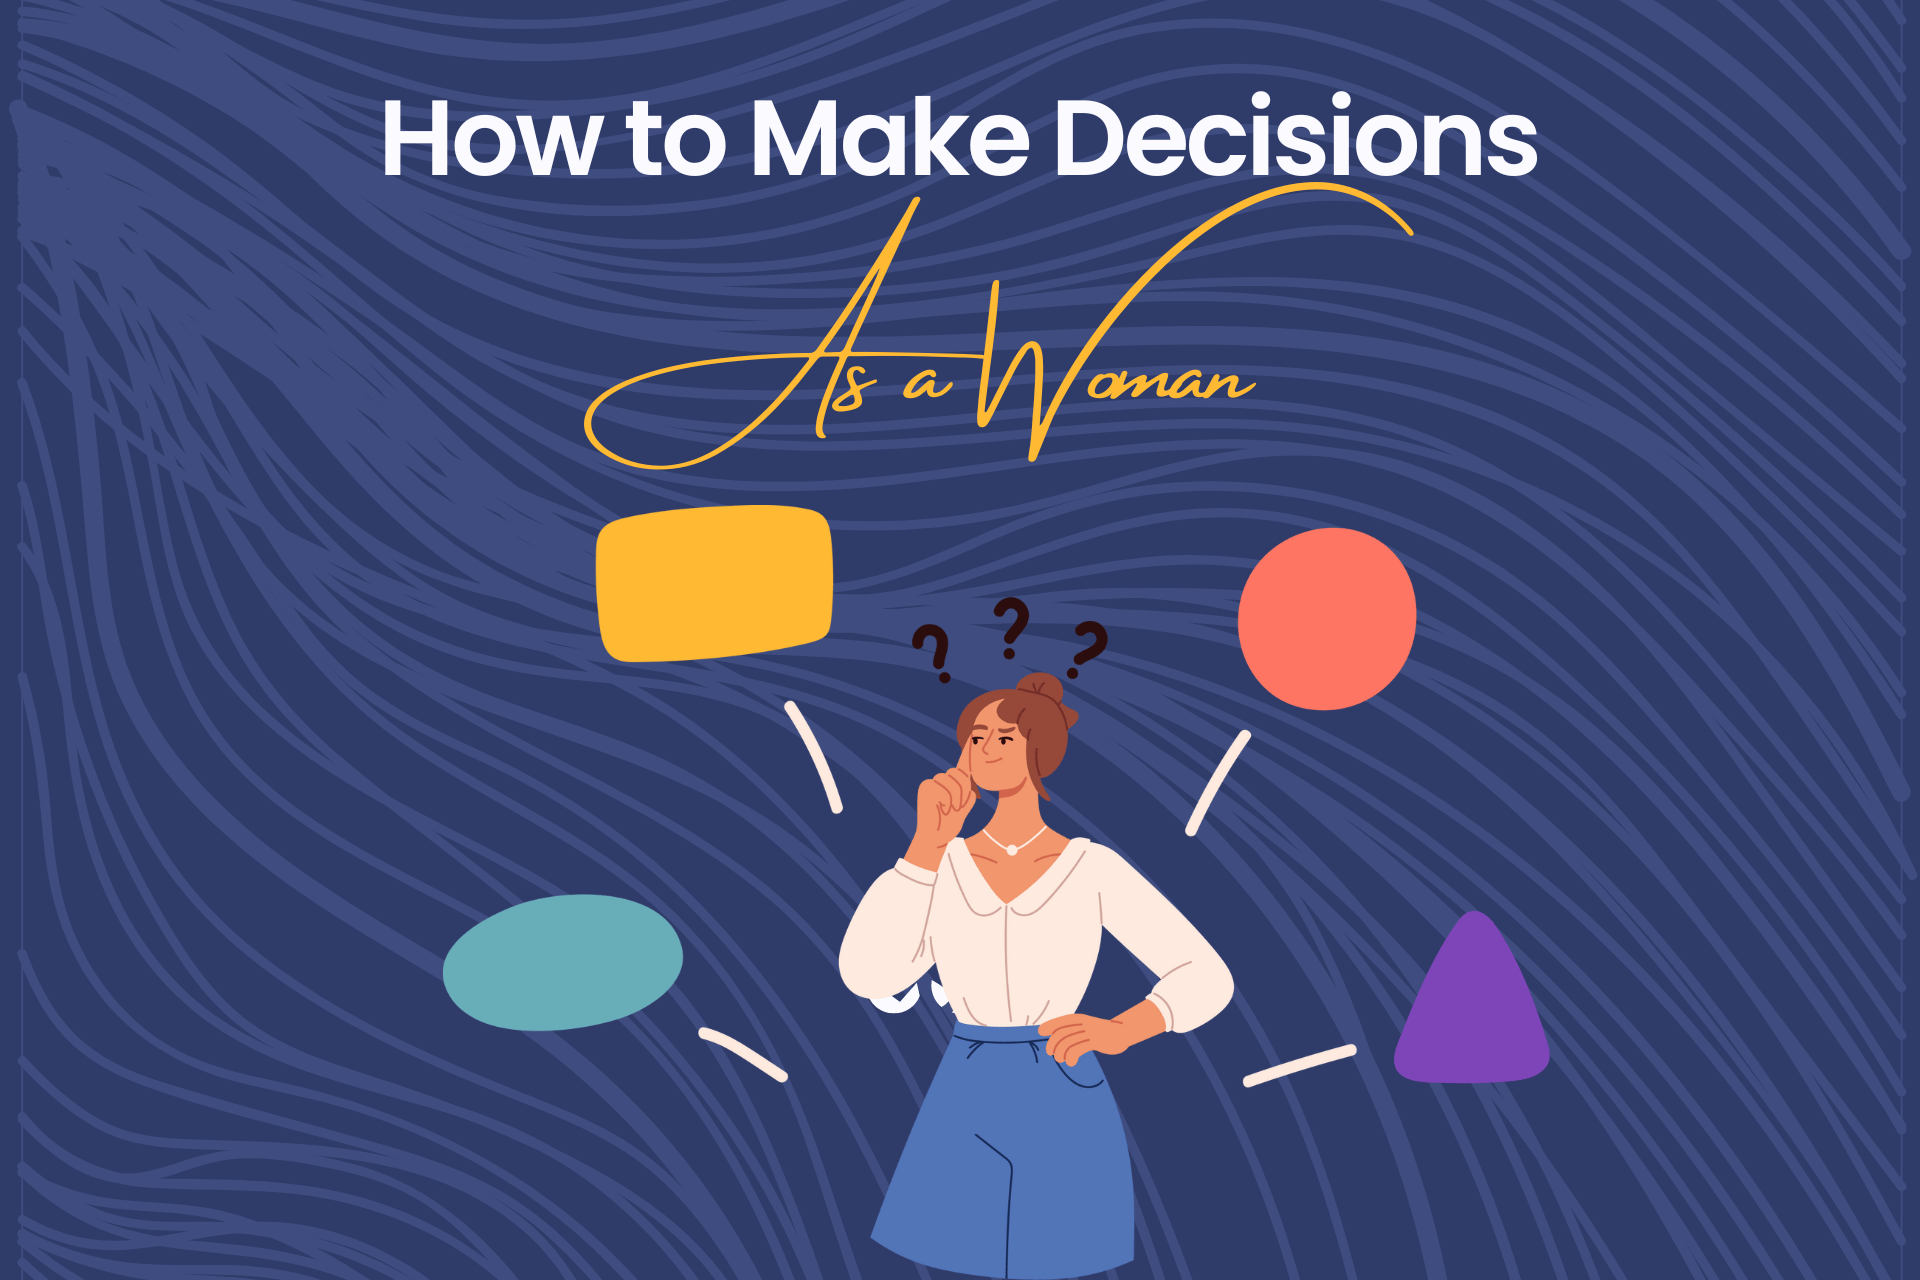 how to make decisions as a woman